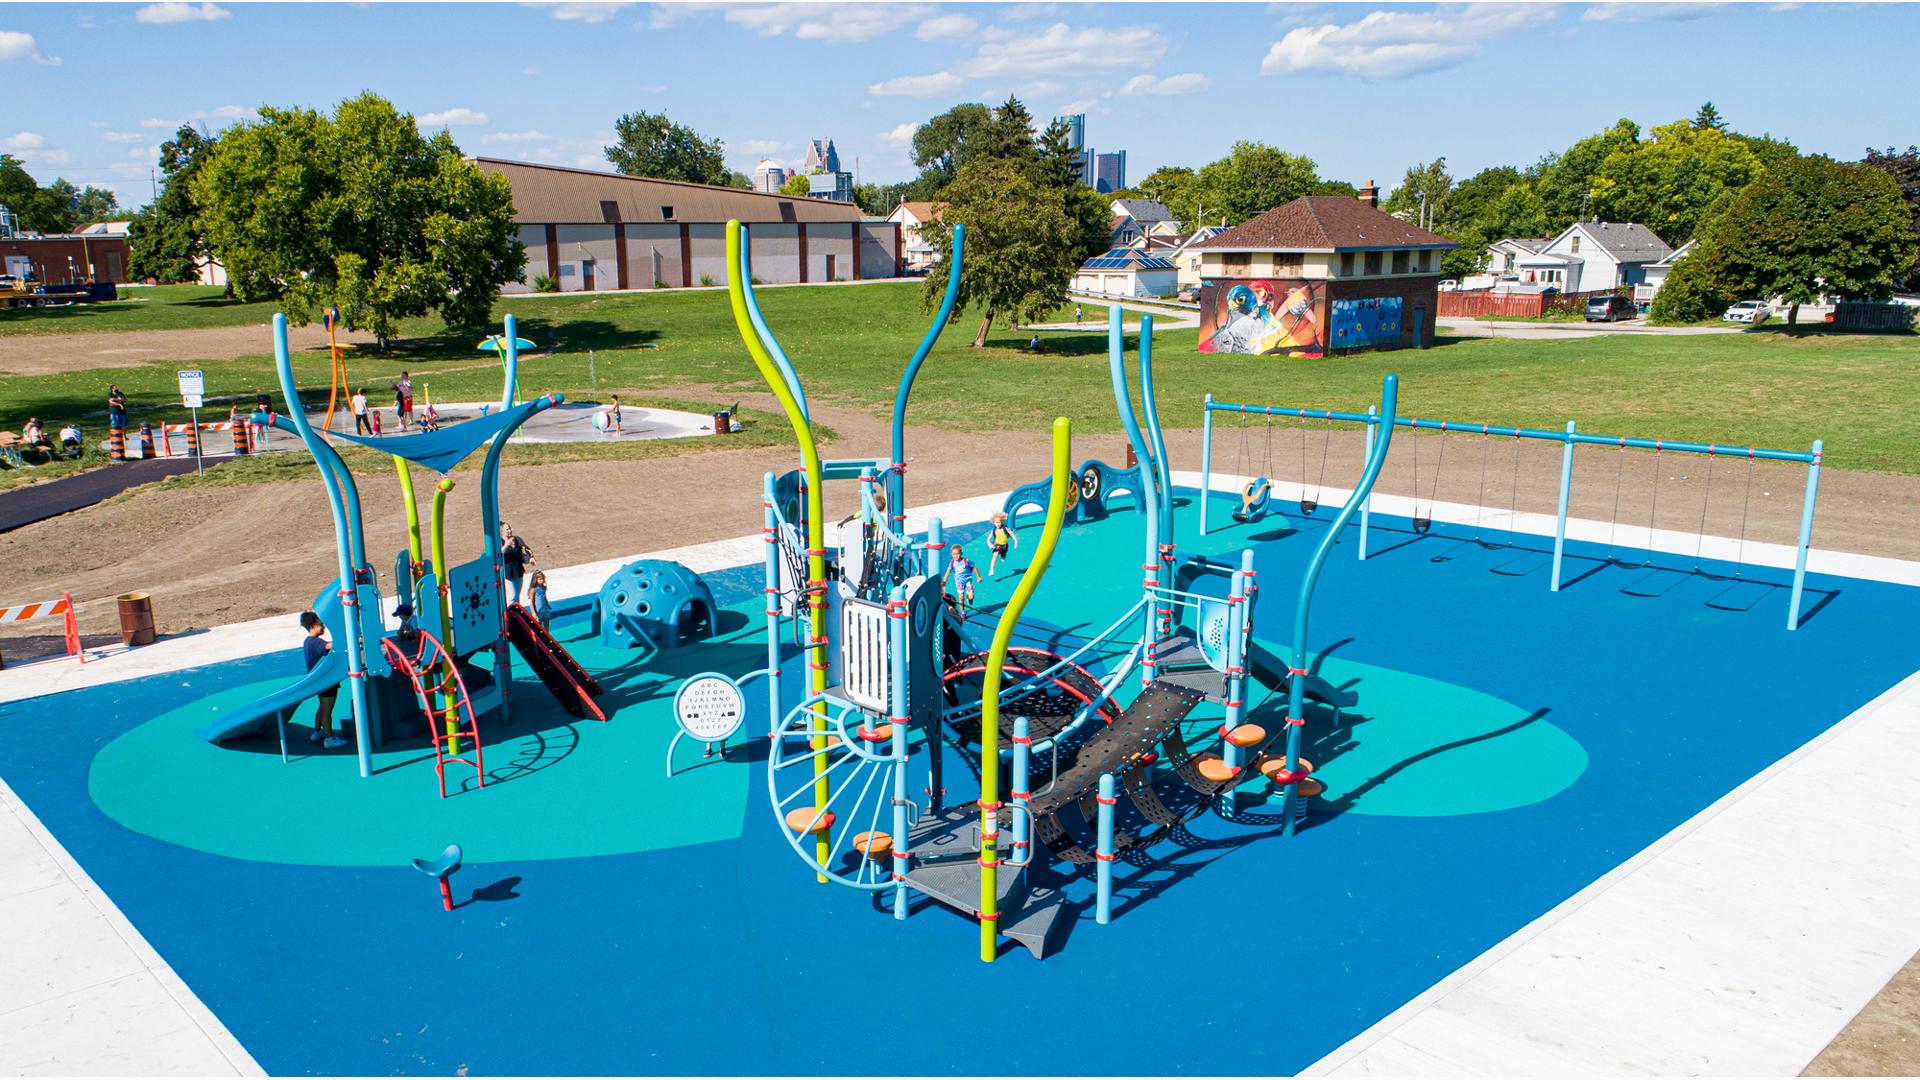 Full elevated view of a park playground with underwater themed play structures, children play at a splash pad just beyond the playground area.